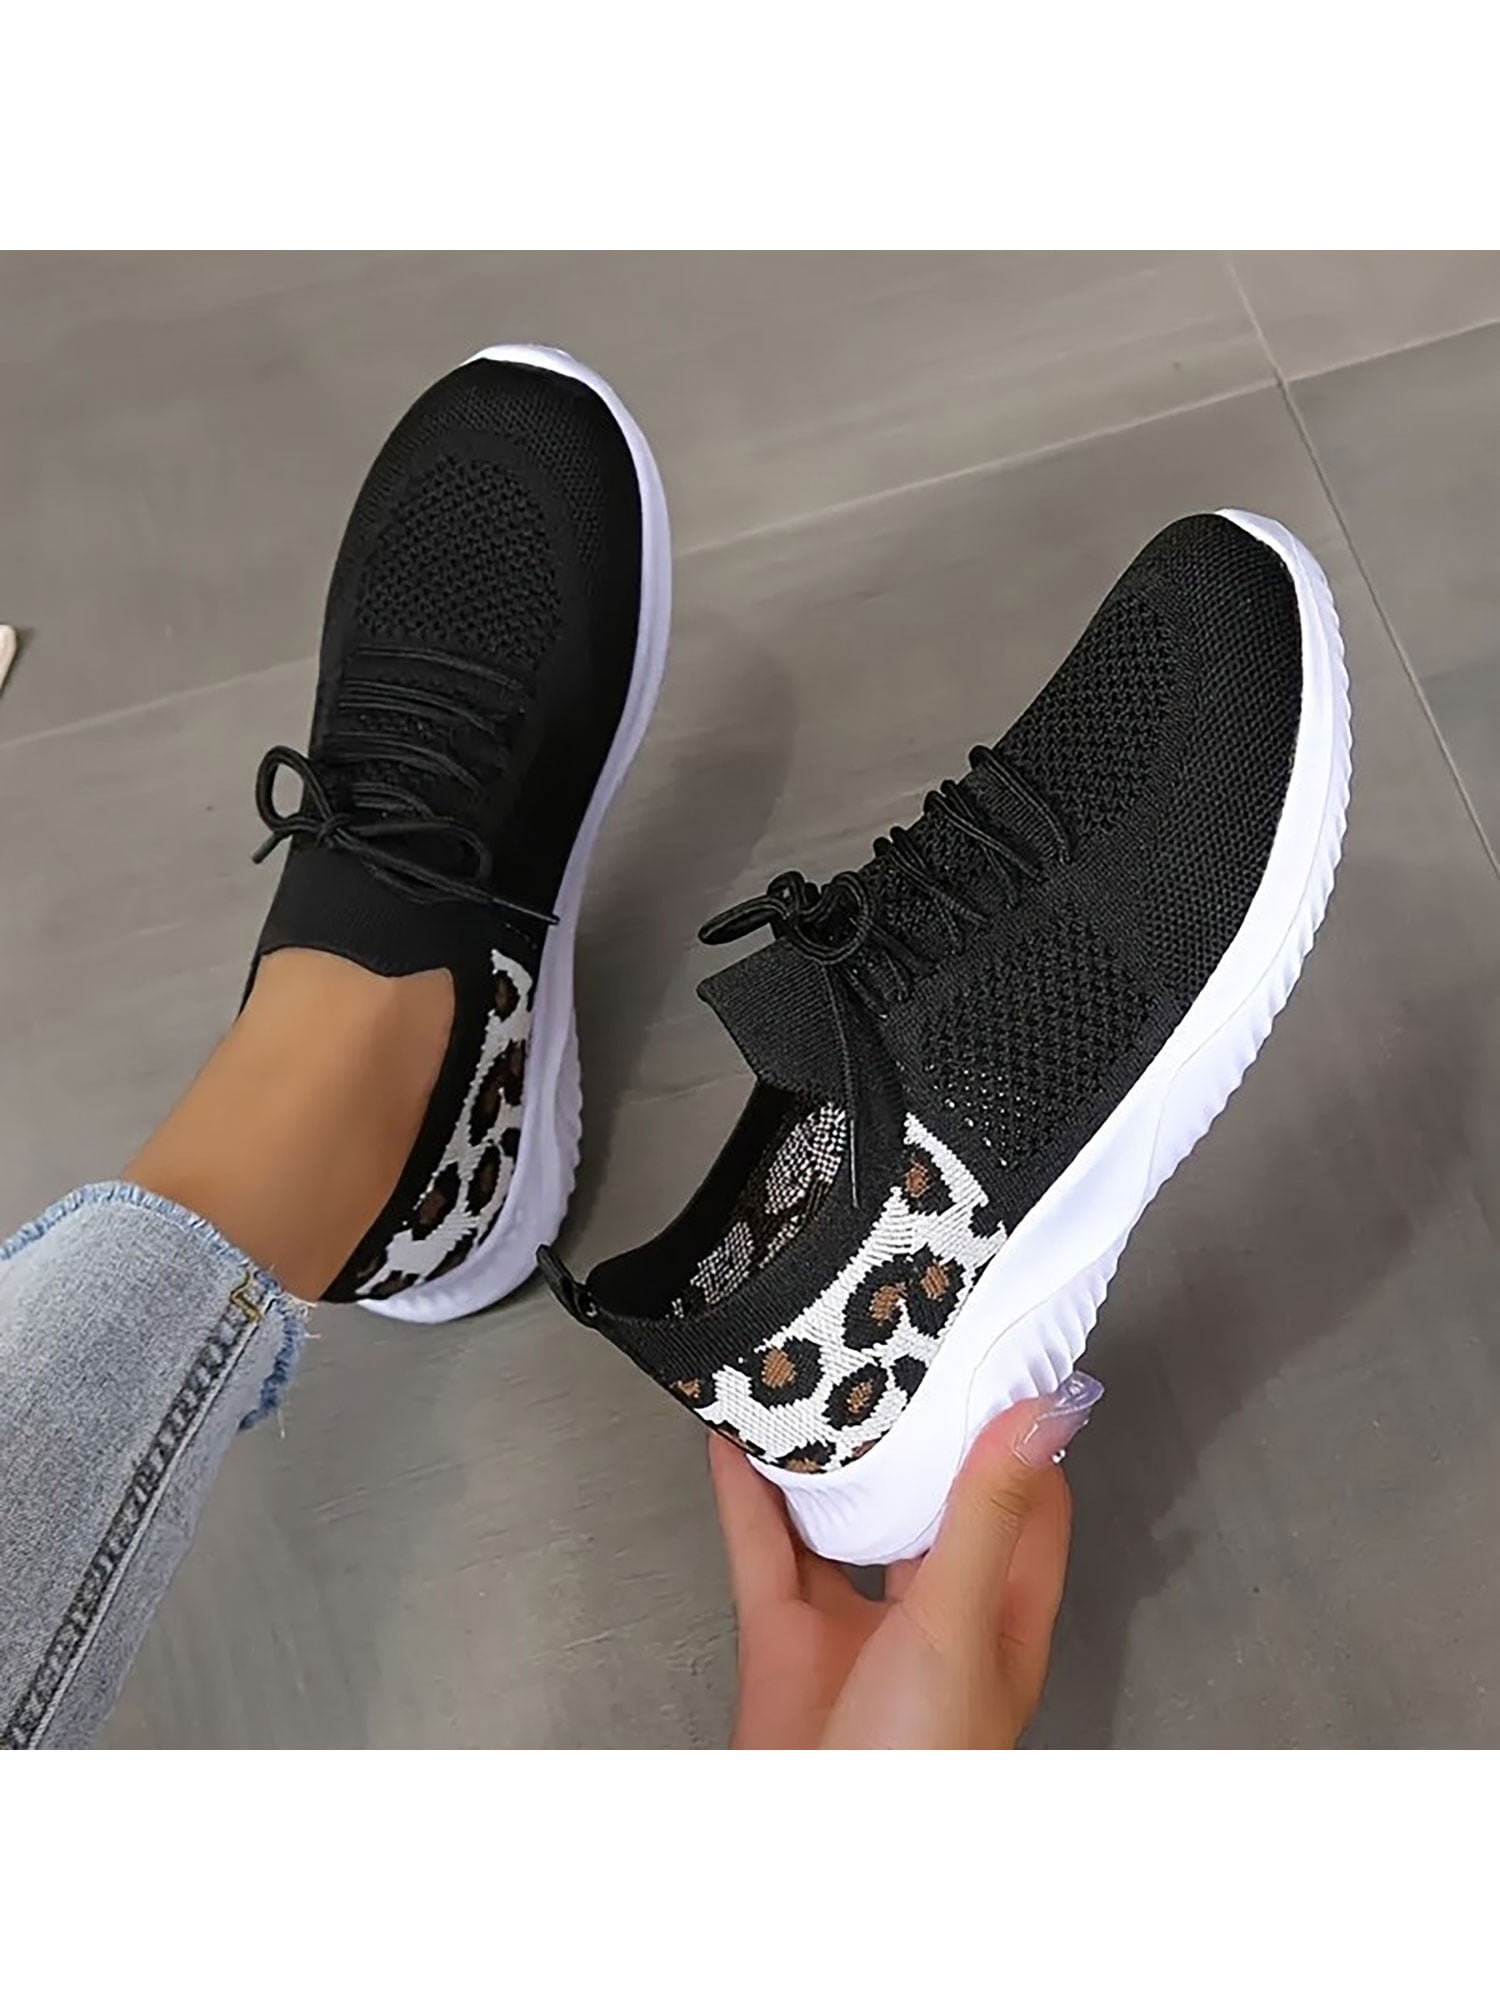 Ladies Running Shoe Lace Up Athletic Shoes Mesh Sneakers Non-Slip Leopard Print Flats Gym Trainers Black 8 -